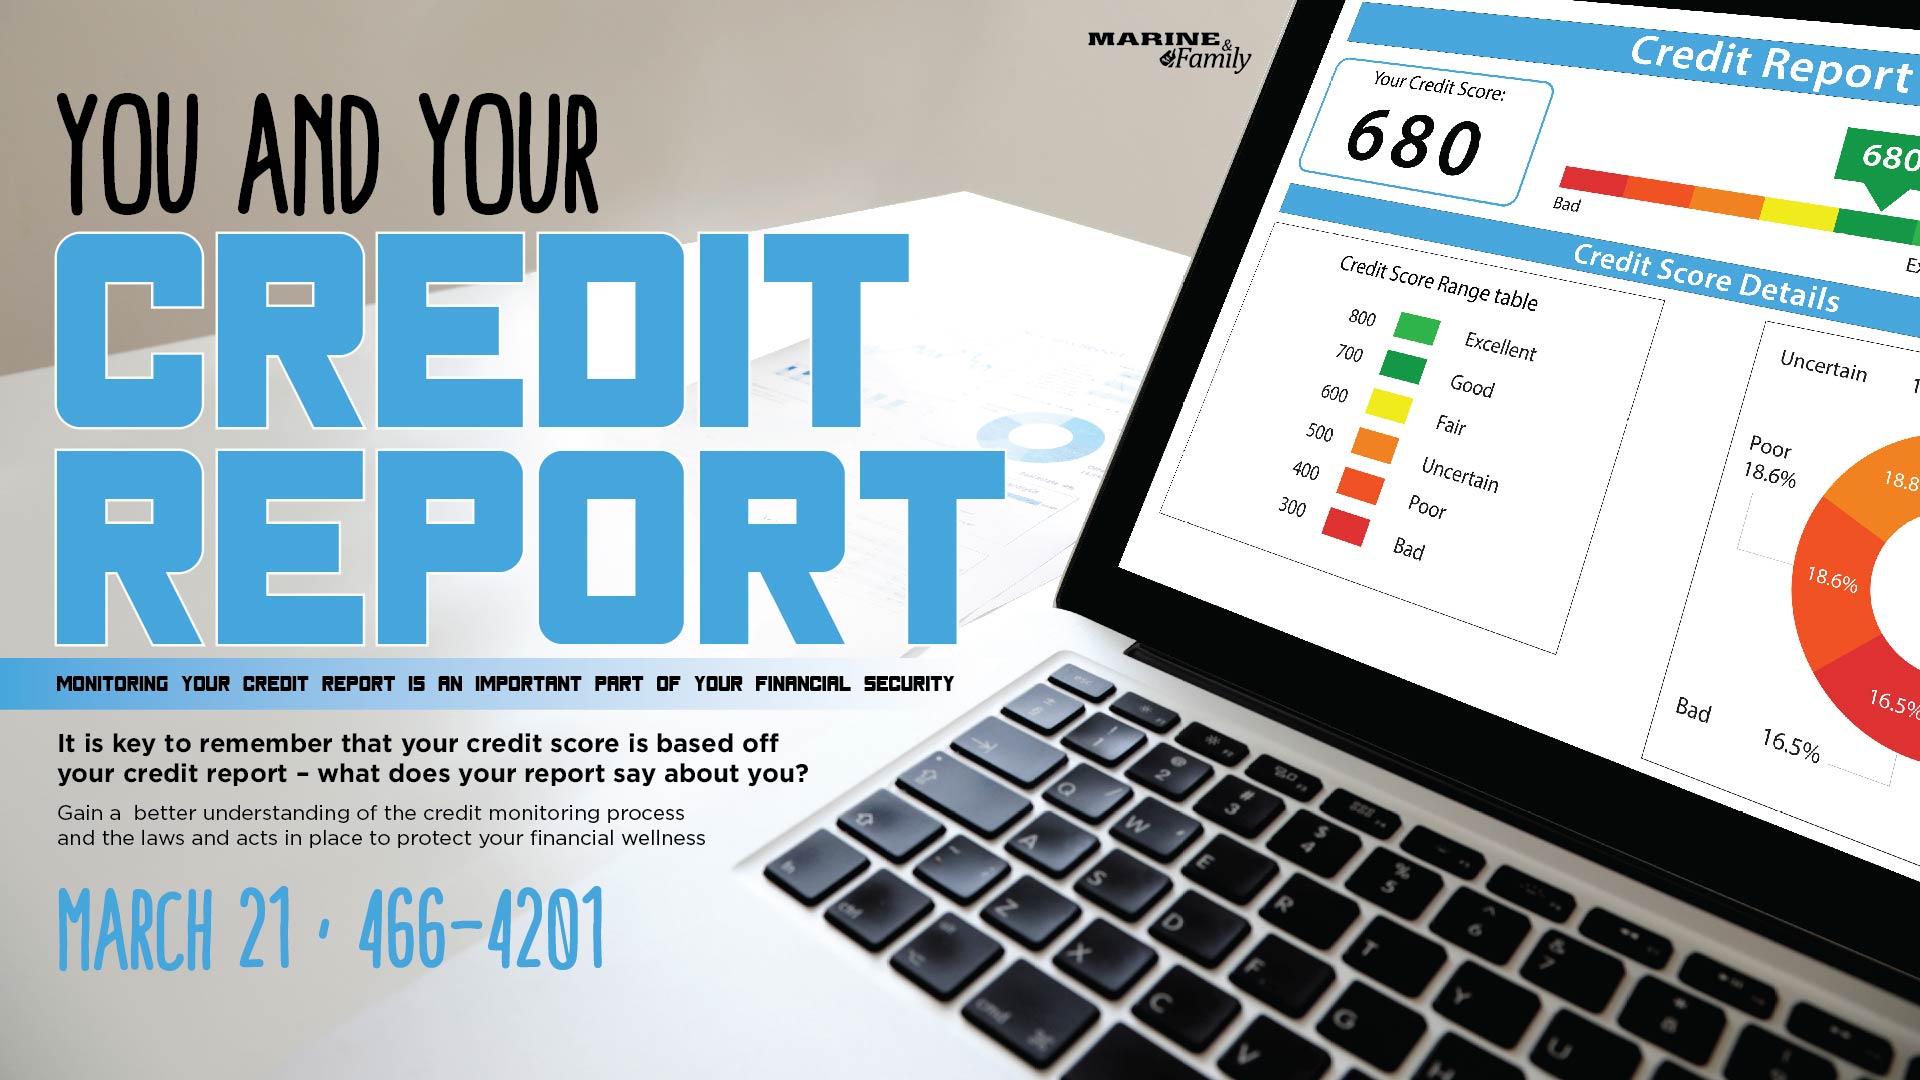 Credit Monitoring - What's In Your Report?